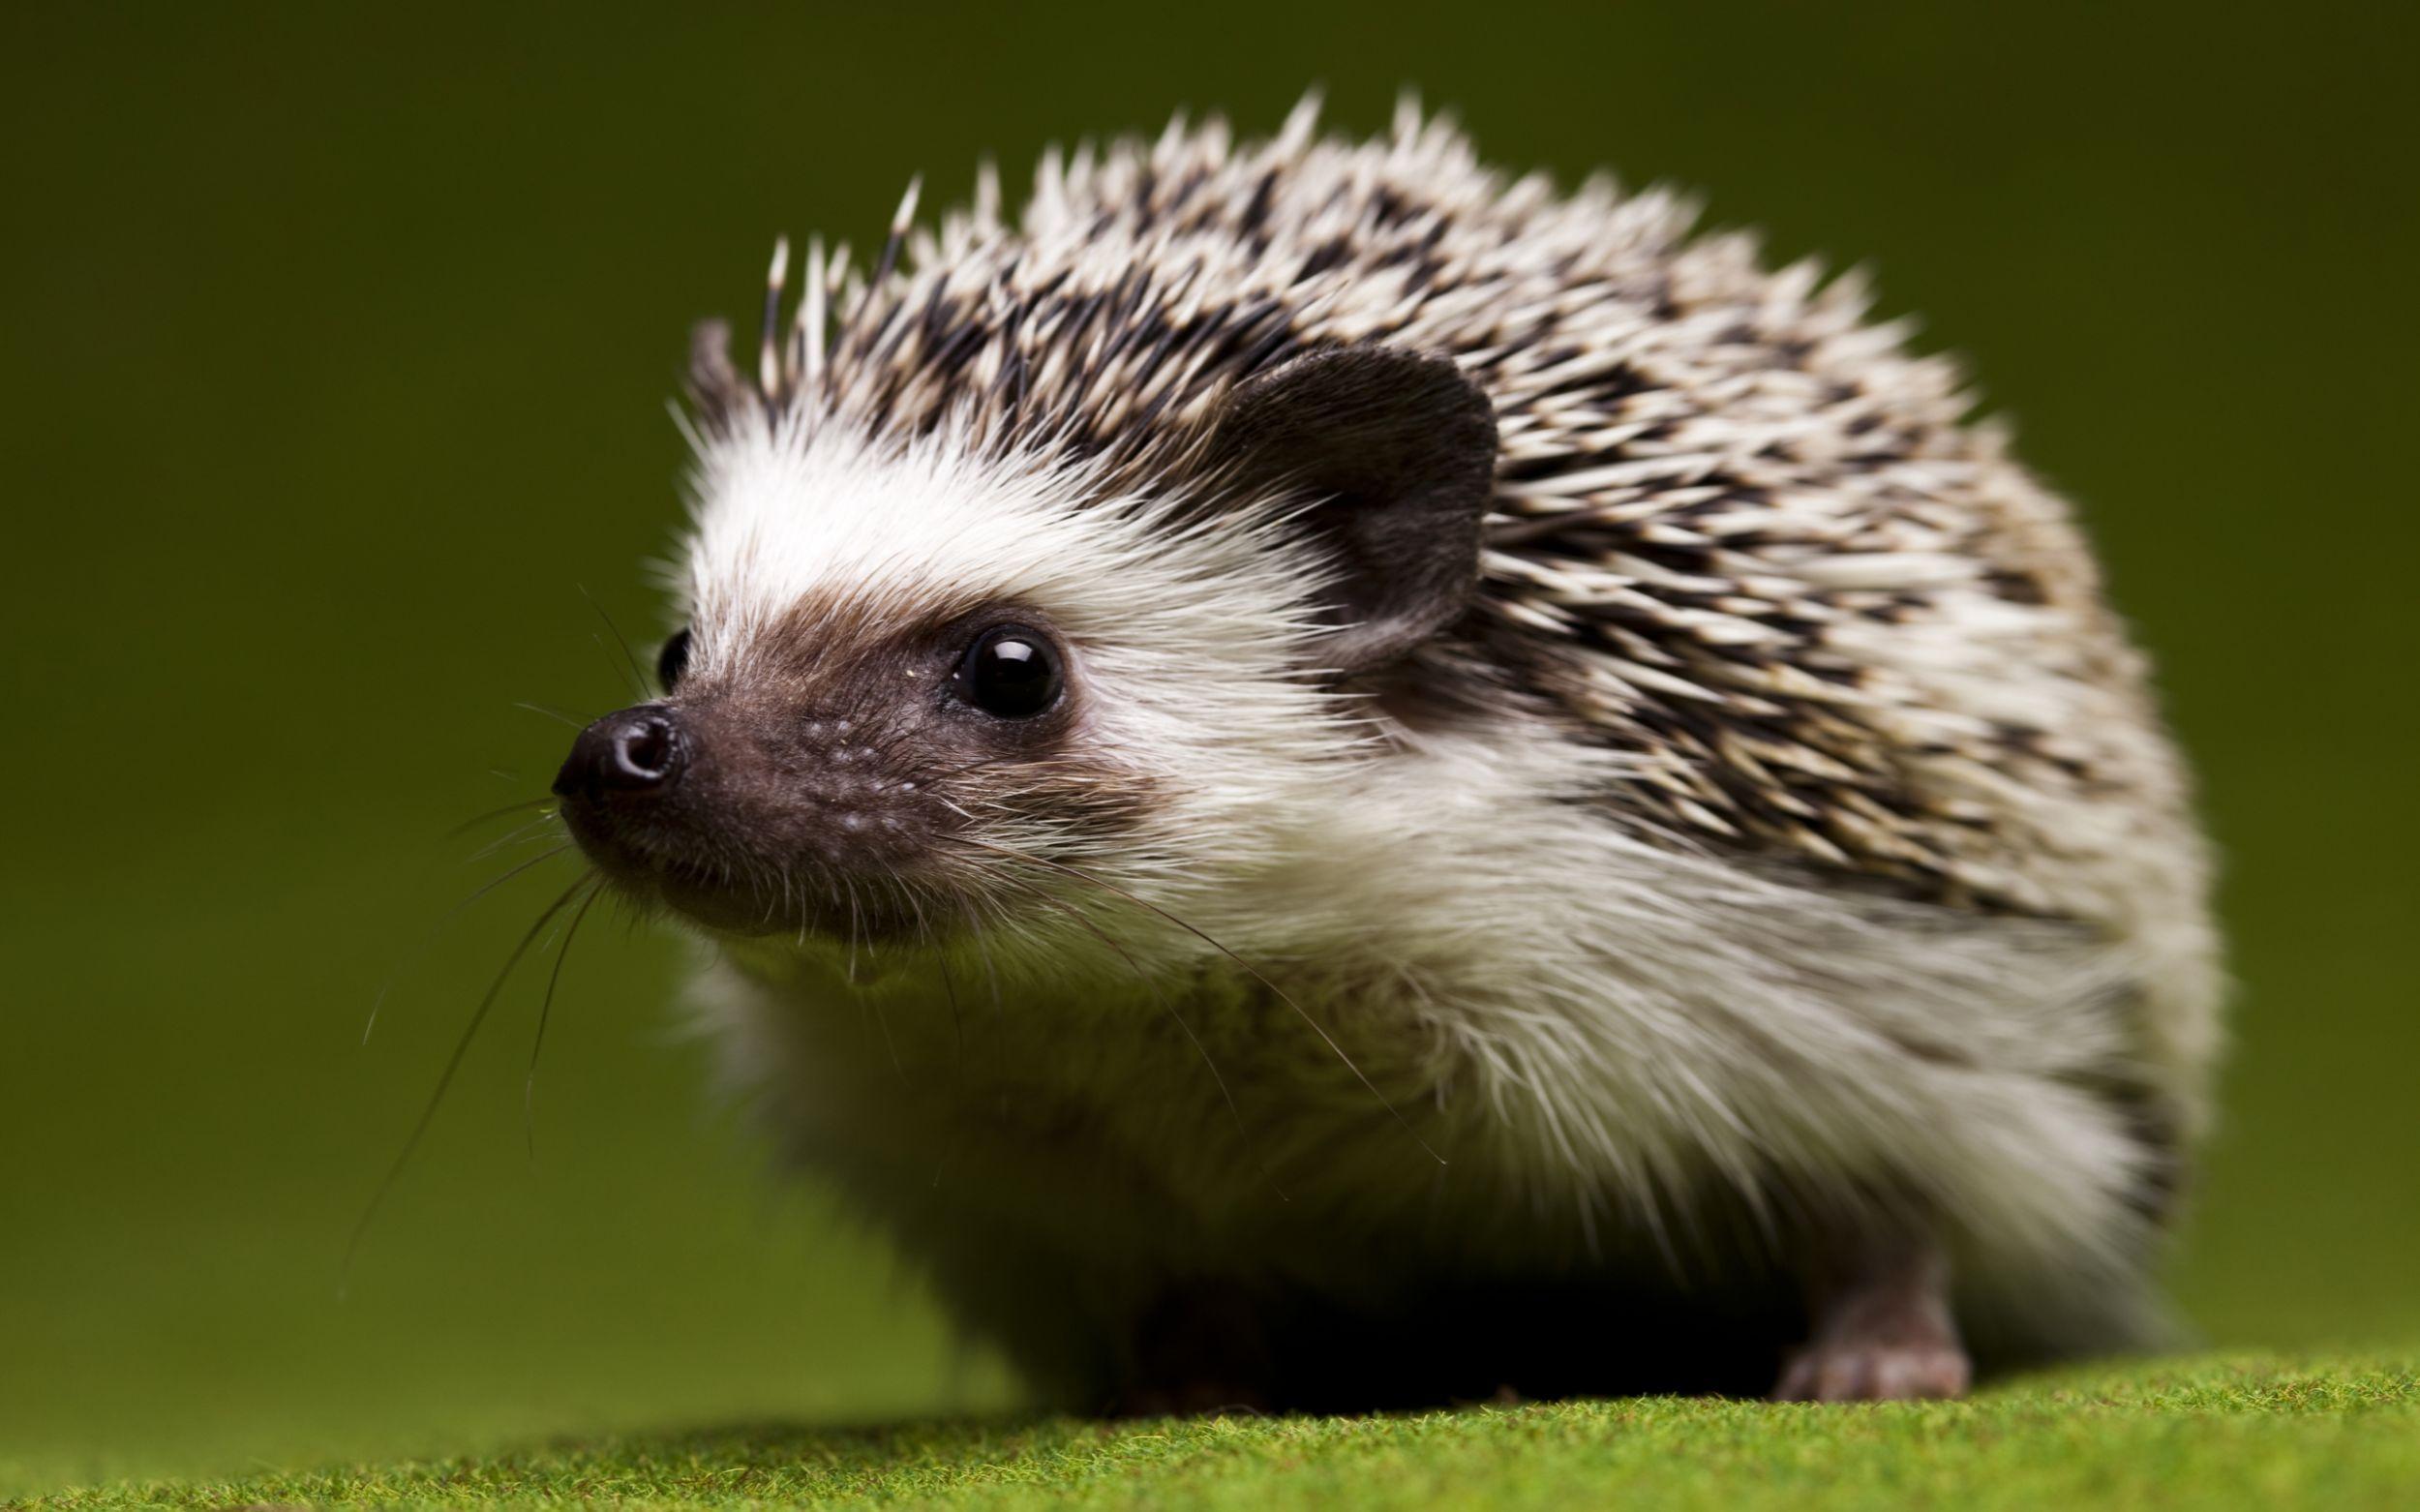 Of The Day: Hedgehog